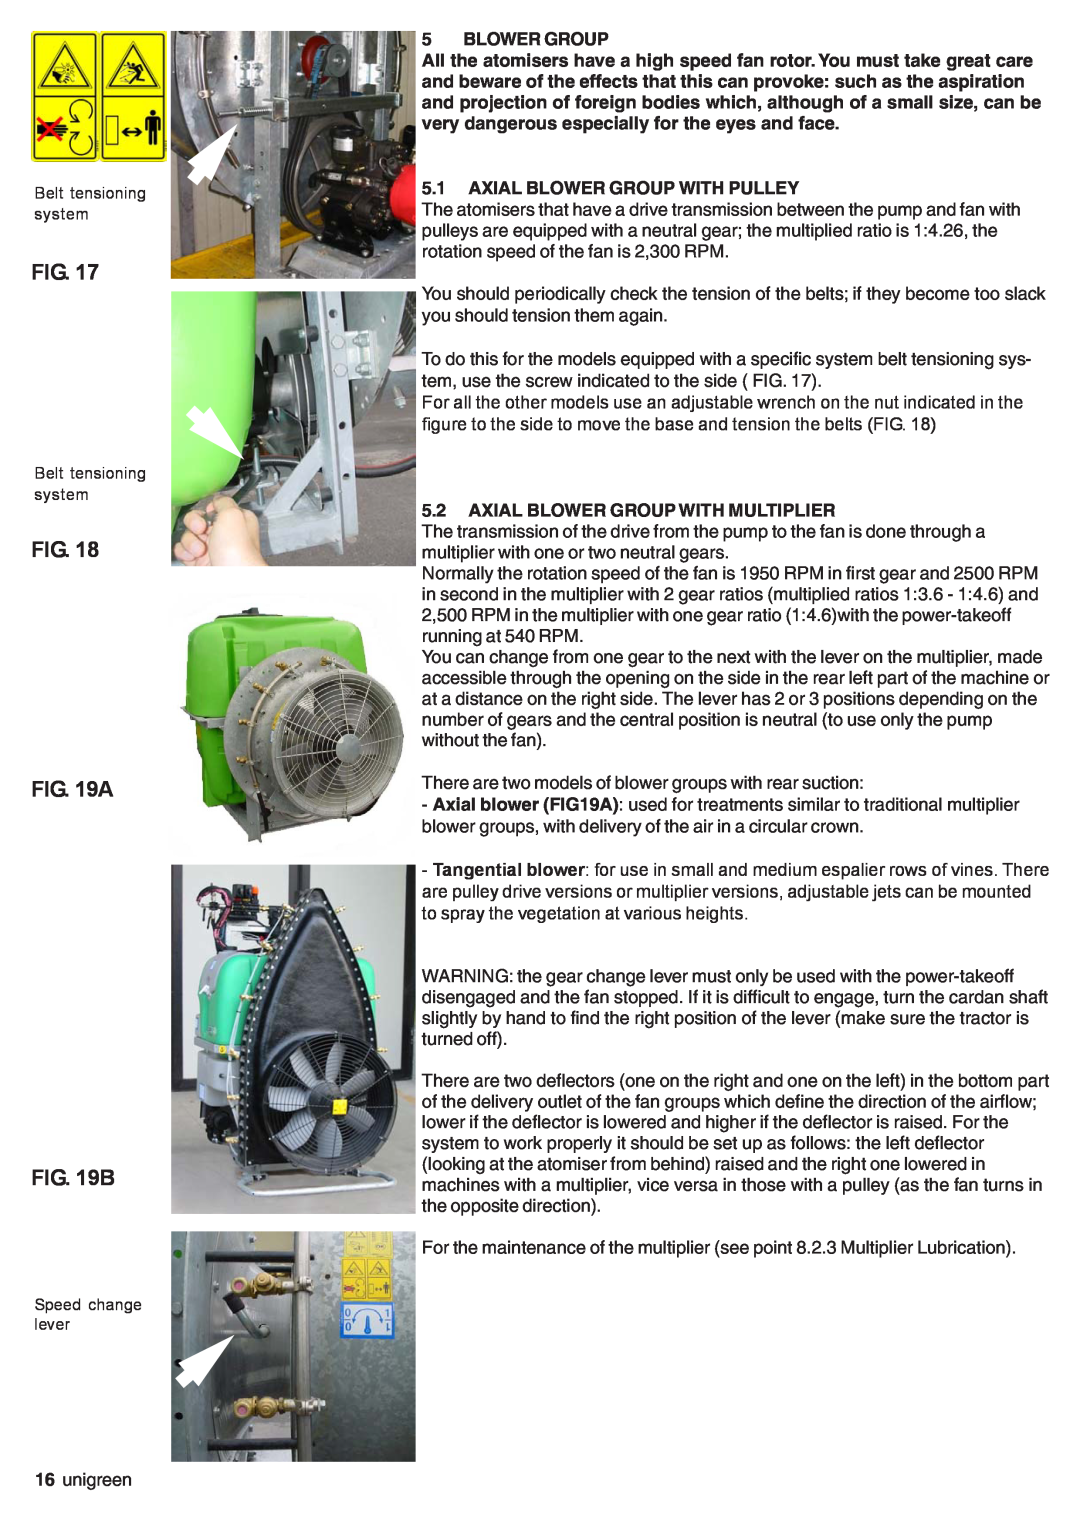 Unigreen EXPO, SIRIO Fig. A B, 5BLOWER GROUP, 5.1AXIAL BLOWER GROUP WITH PULLEY, 5.2AXIAL BLOWER GROUP WITH MULTIPLIER 